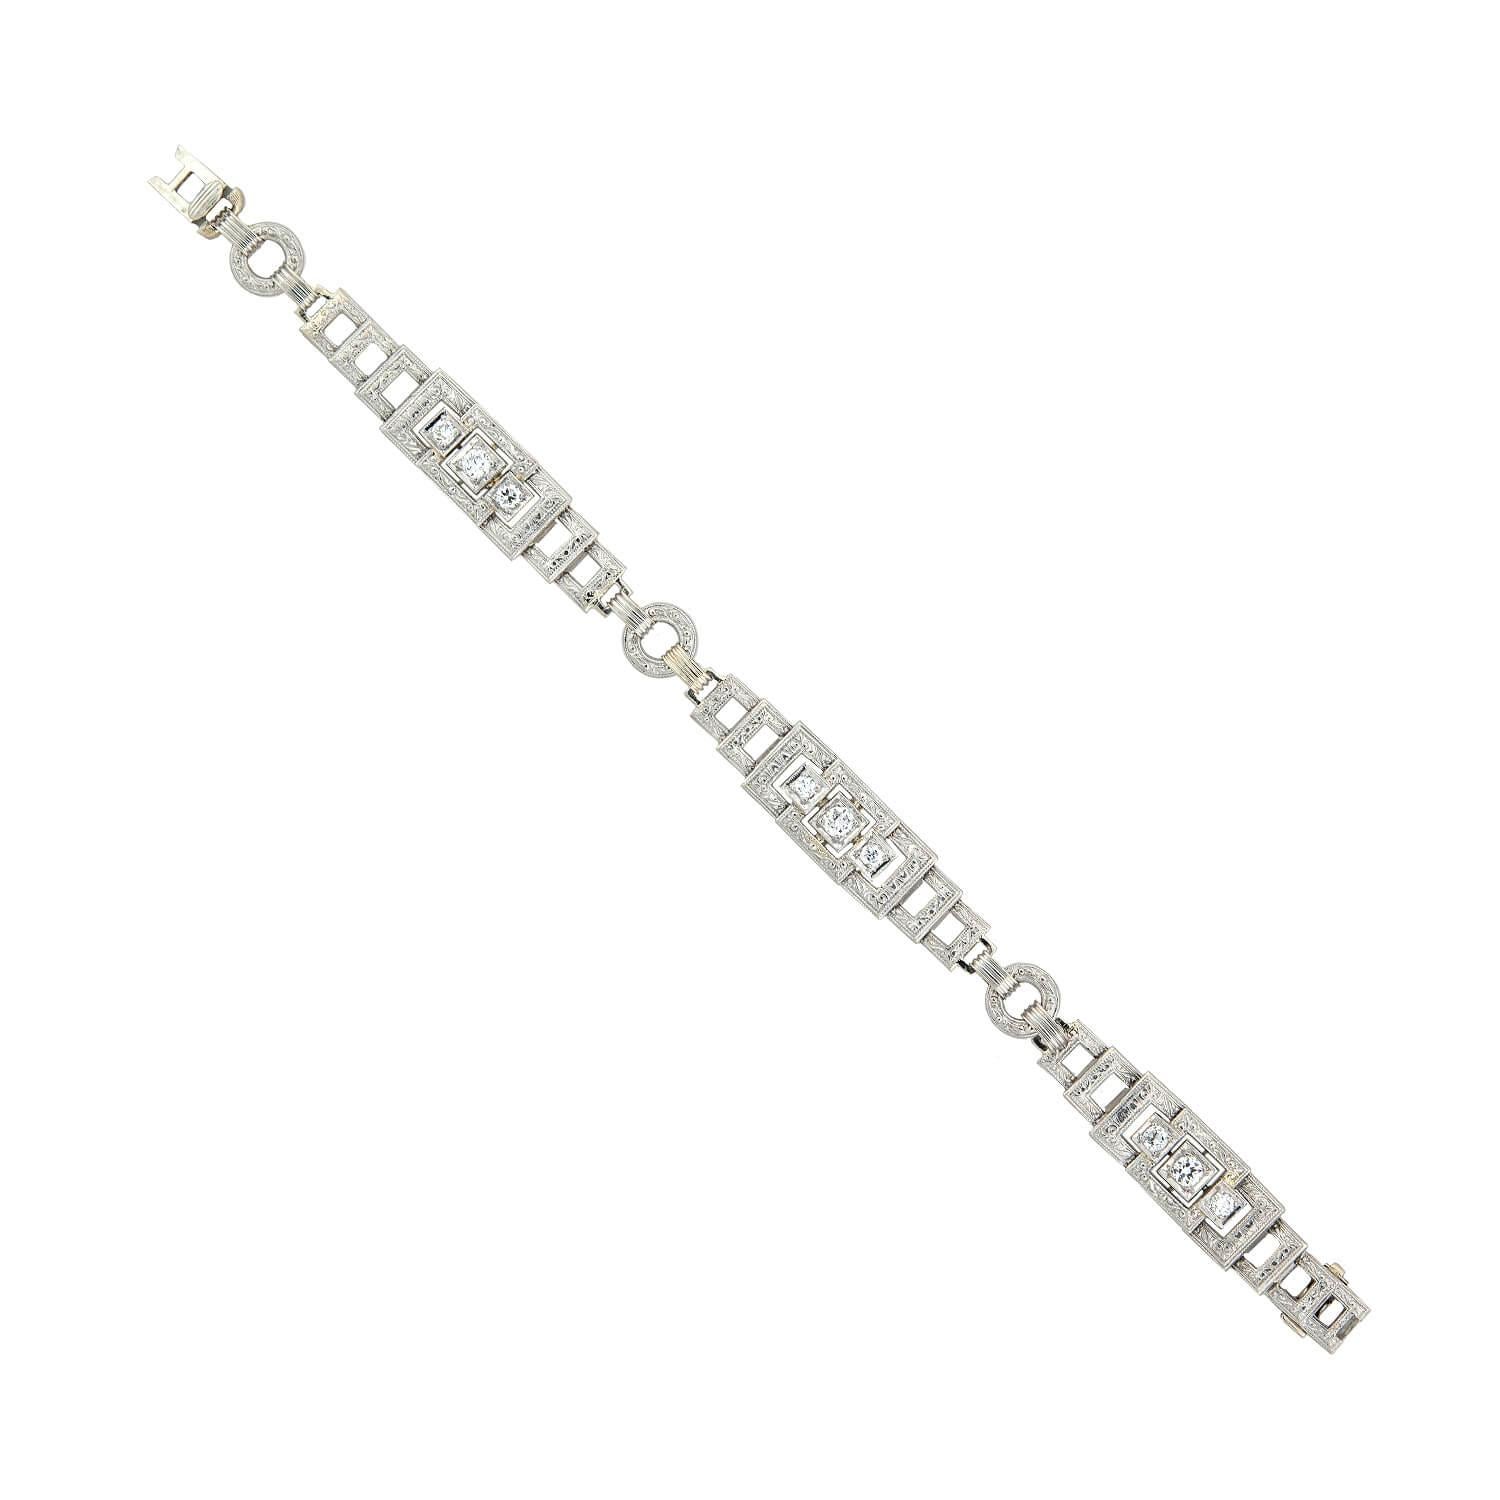 A gorgeous bracelet from the Art Deco (ca1920s) era! Crafted in 14kt yellow gold and topped in platinum, this bracelet has a wonderful geometric appeal. The bracelet is formed by hinged links to create a layered square effect connected by round